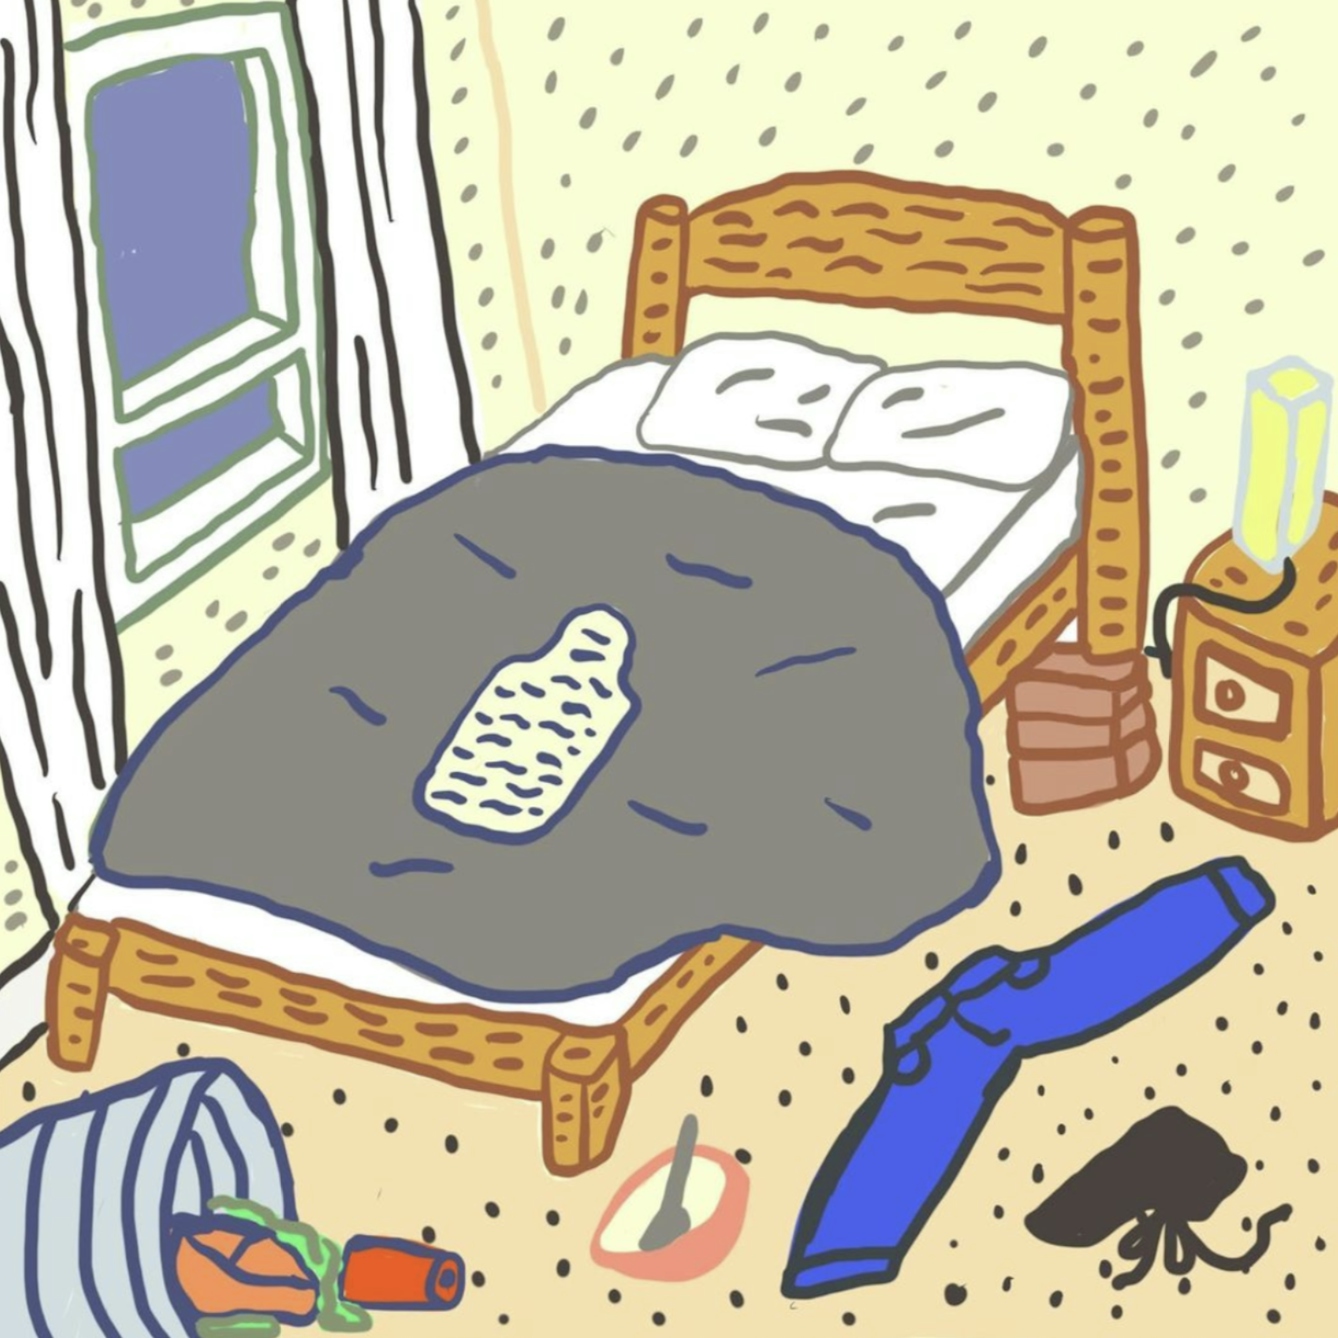 Webcomic showing a double bed in a room with a hot water bottle on top and clothes on the floor.